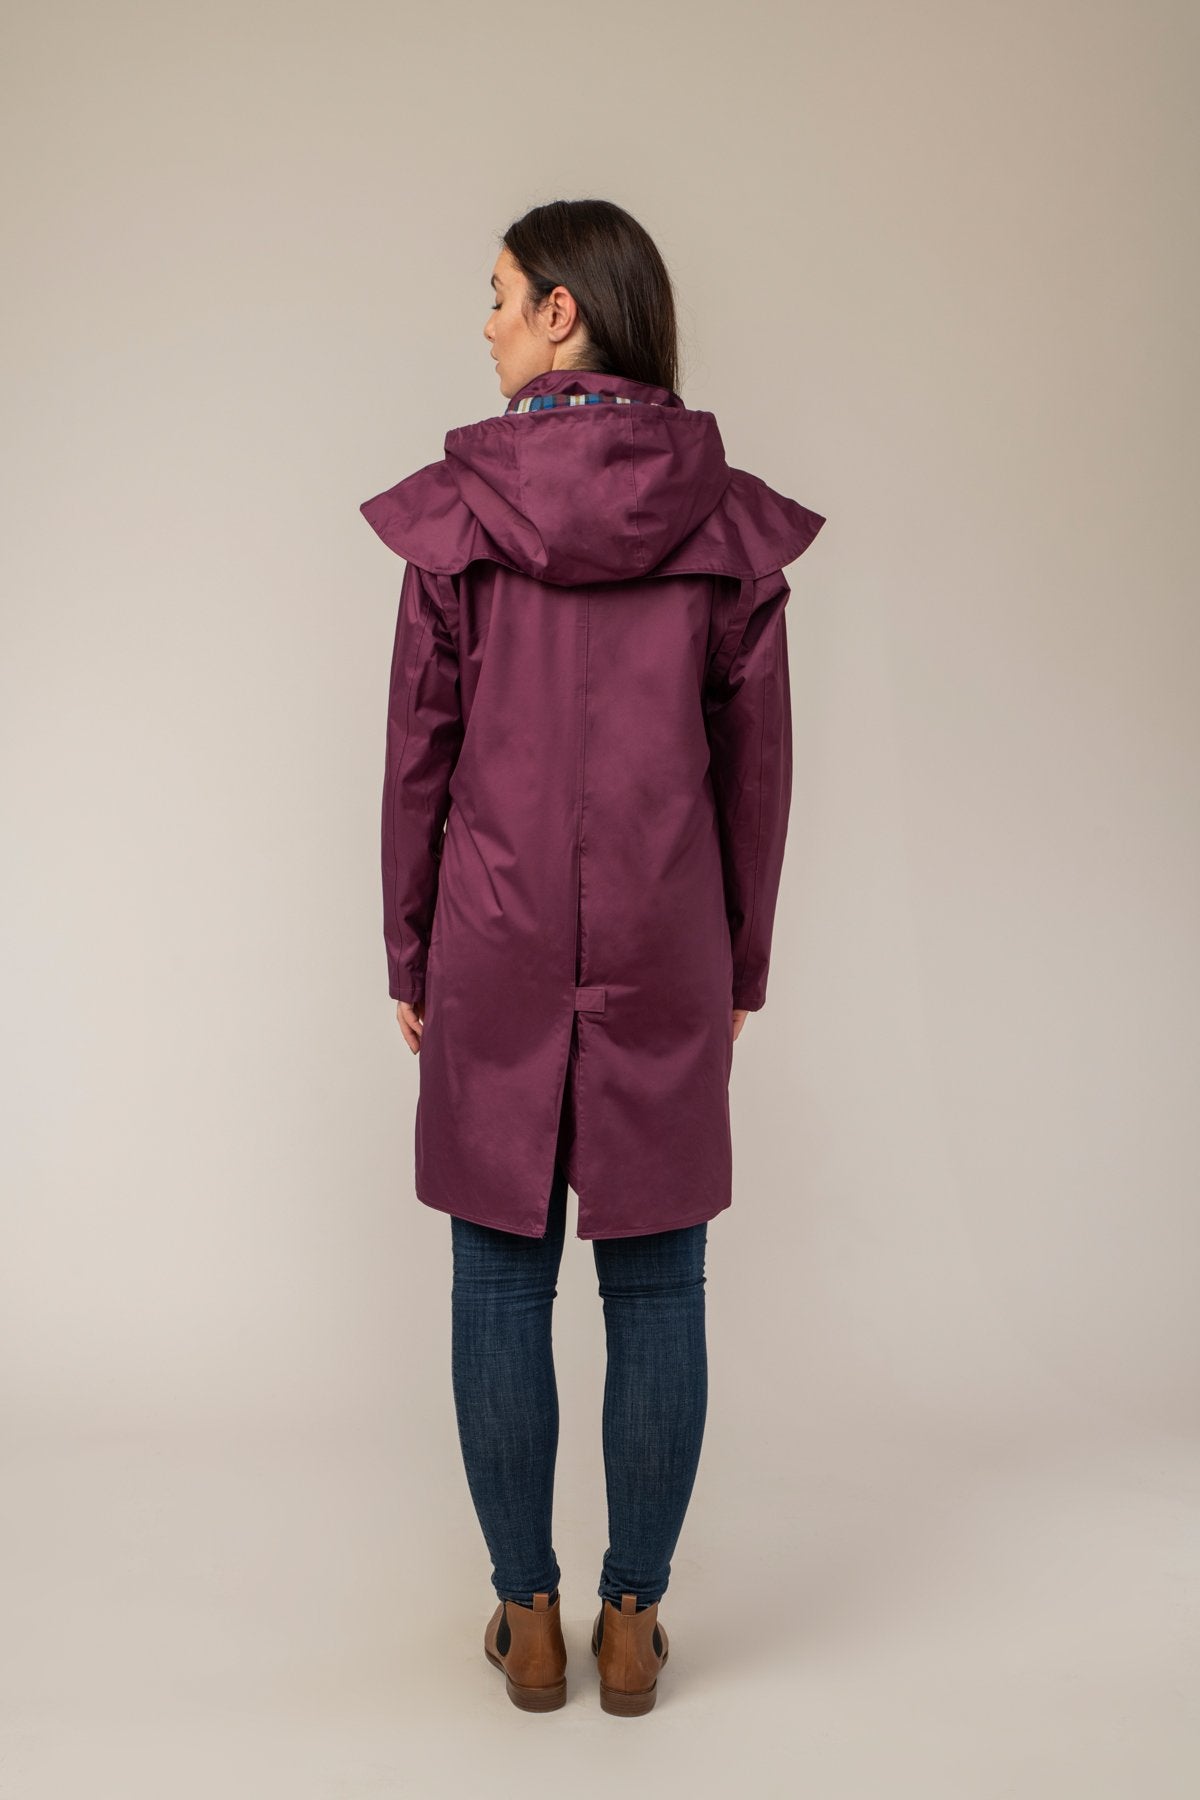 Lighthouse Outrider 3/4 Length Waterproof Raincoat